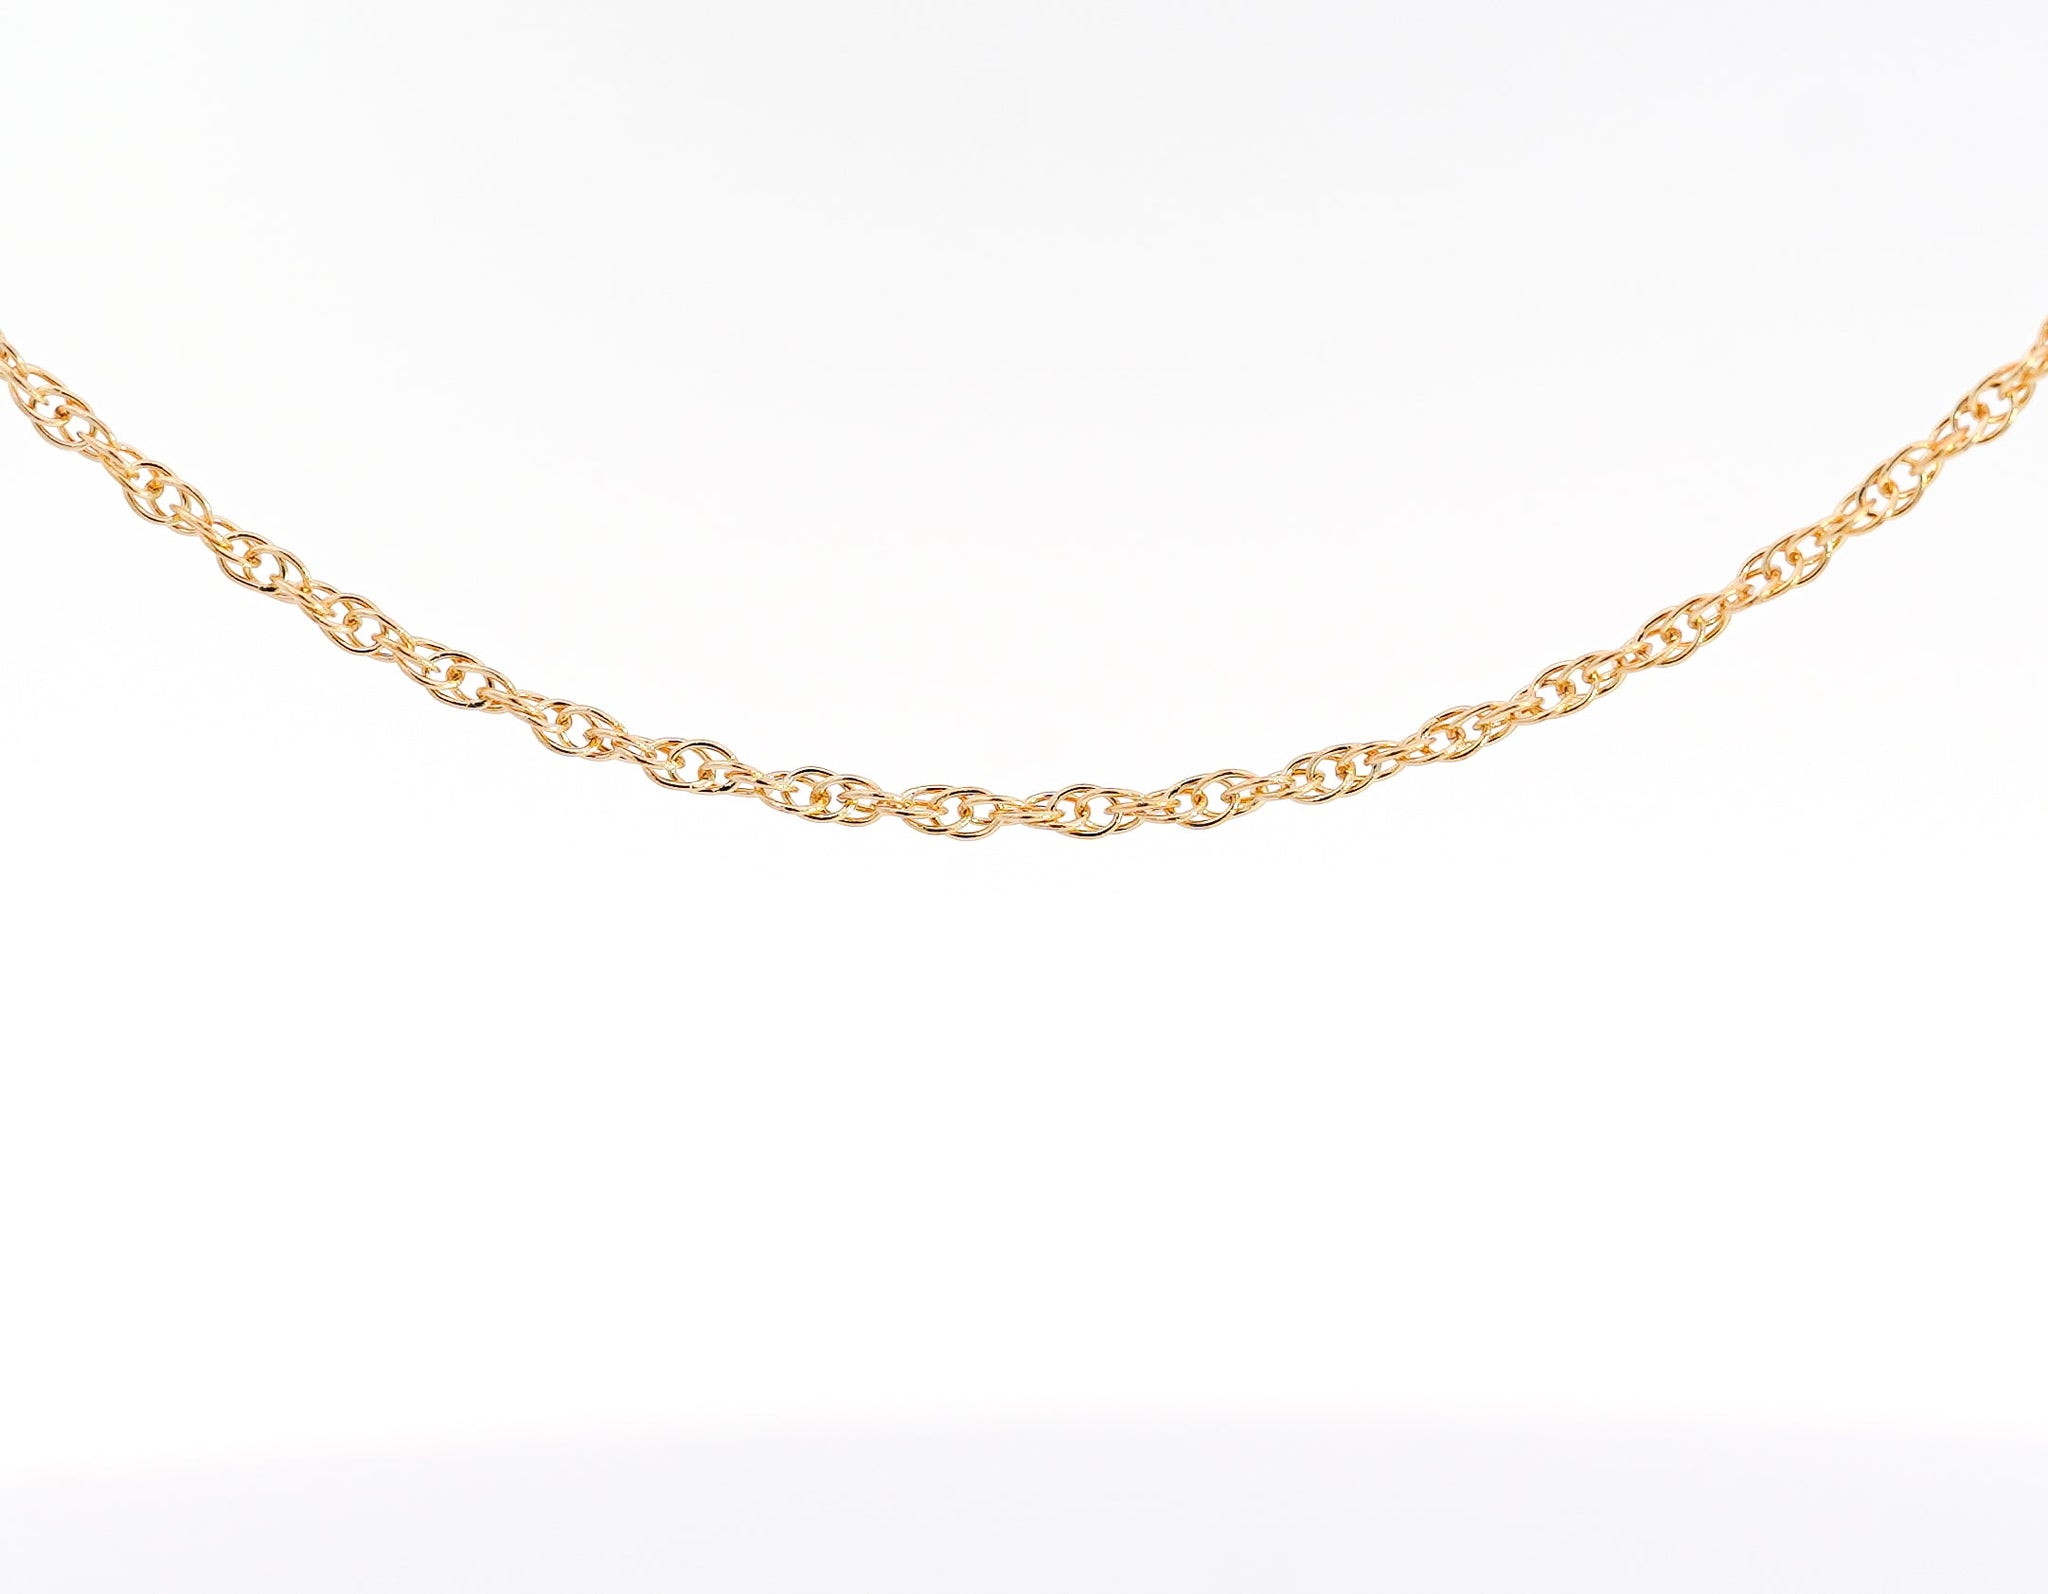 14K Gold Thin 1-1.5mm Rope Chain Cable Choker Necklace 15-18 18 inch - 1.5 mm